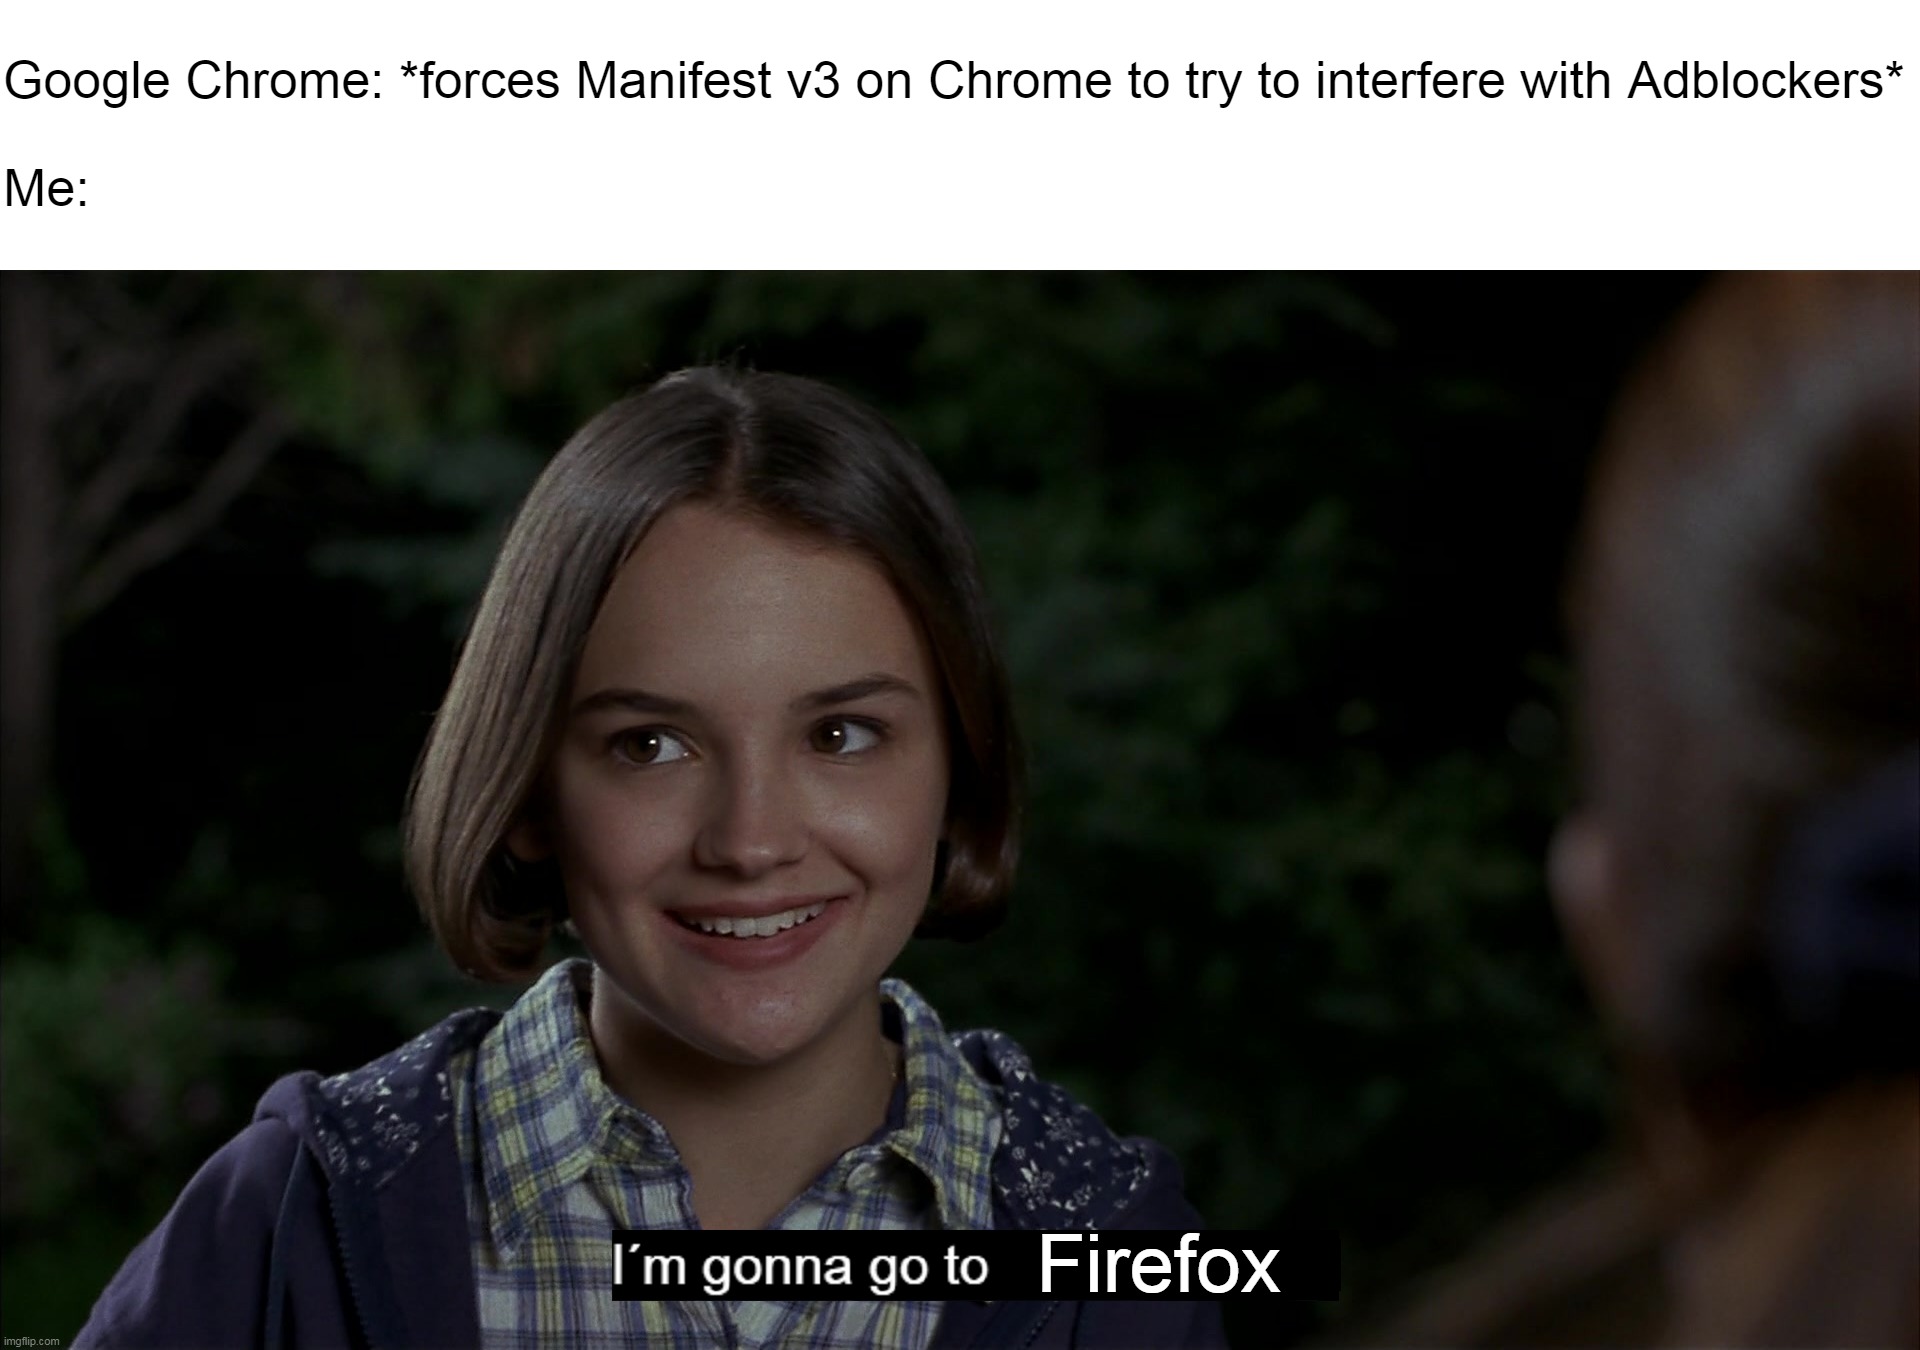 Google Chrome: *forces Manifest v3 on Chrome to try to interfere with Adblockers*
 
Me:; Firefox | image tagged in meme,memes,humor,chrome,adblock,google | made w/ Imgflip meme maker